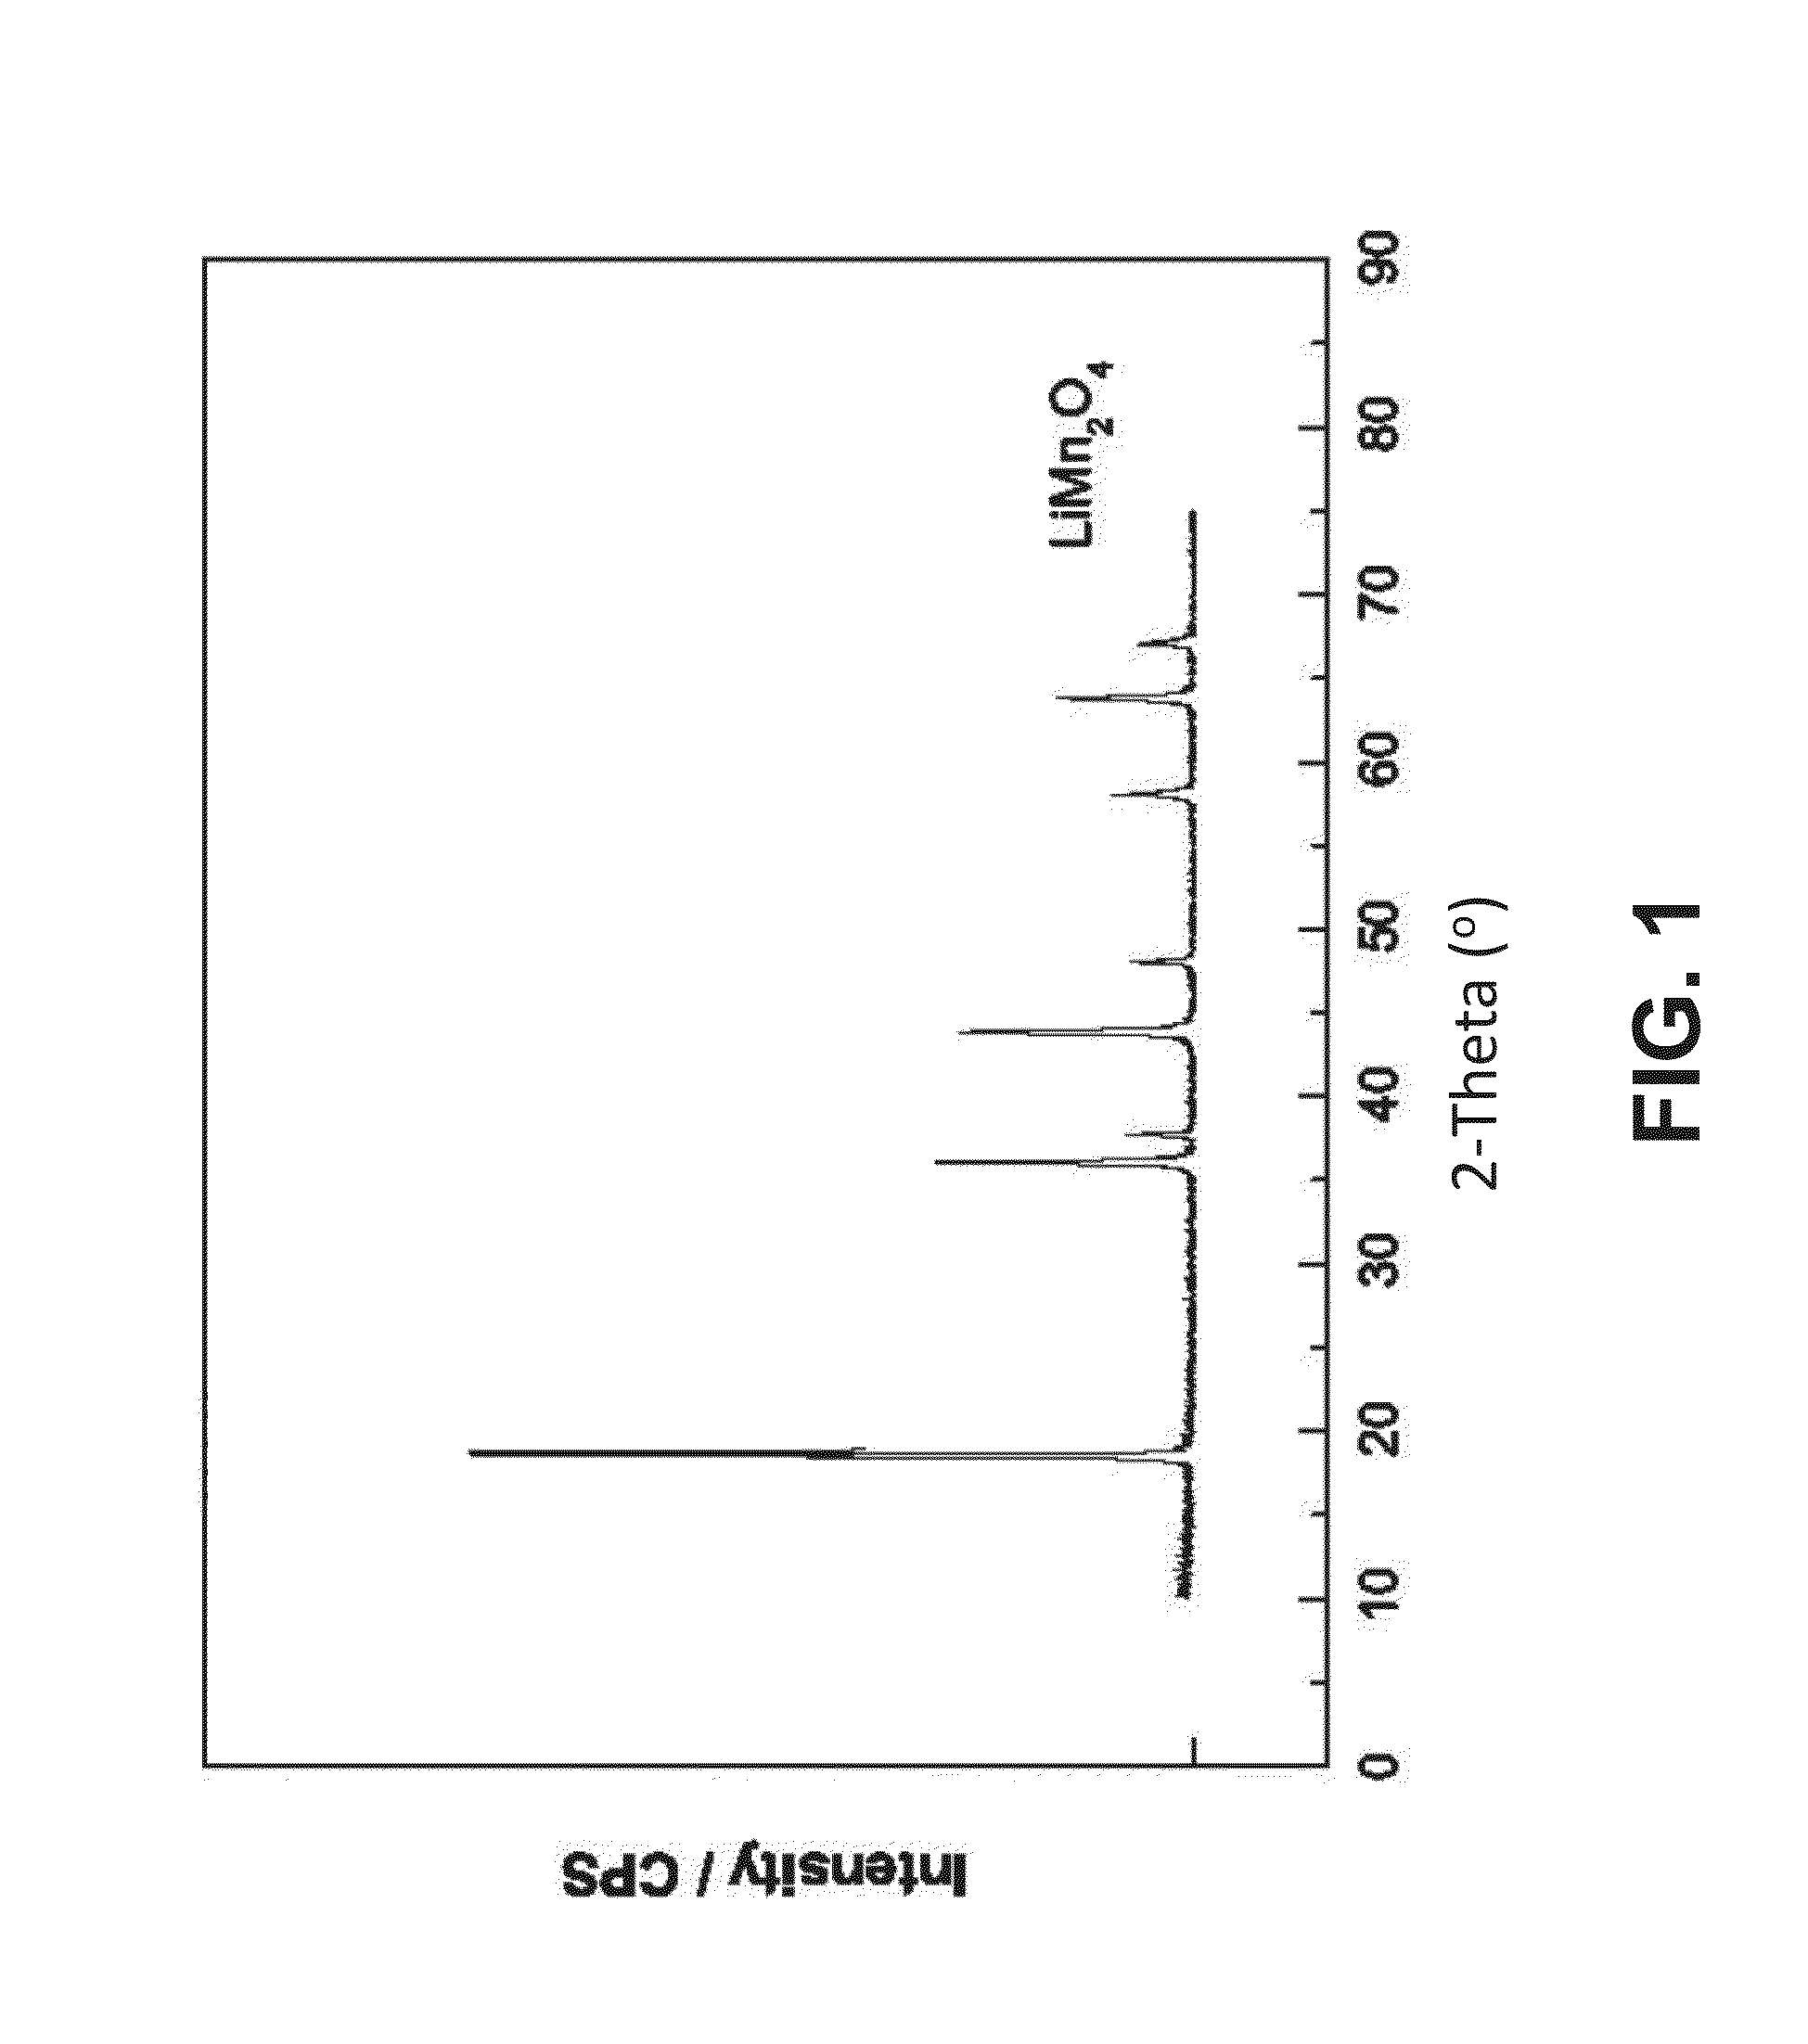 Method and electrochemical device for low environmental impact lithium recovery from aqueous solutions